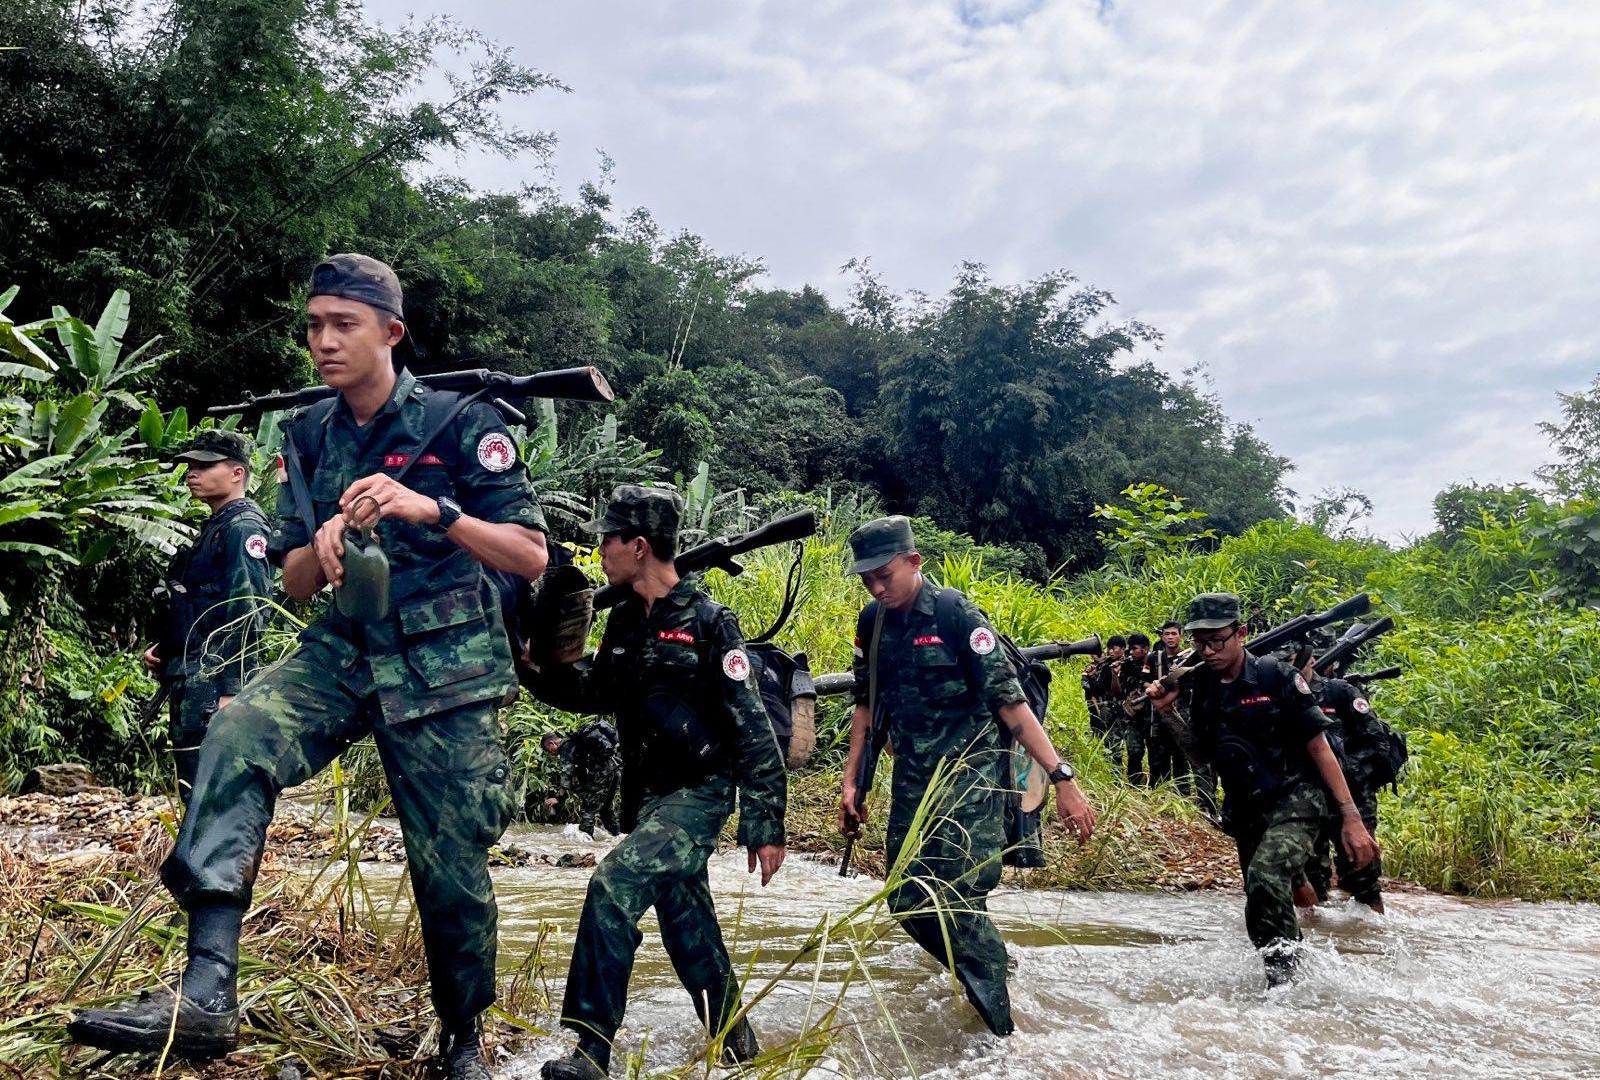 Northern offensive brings ‘new energy’ to Myanmar’s anti-coup resistance